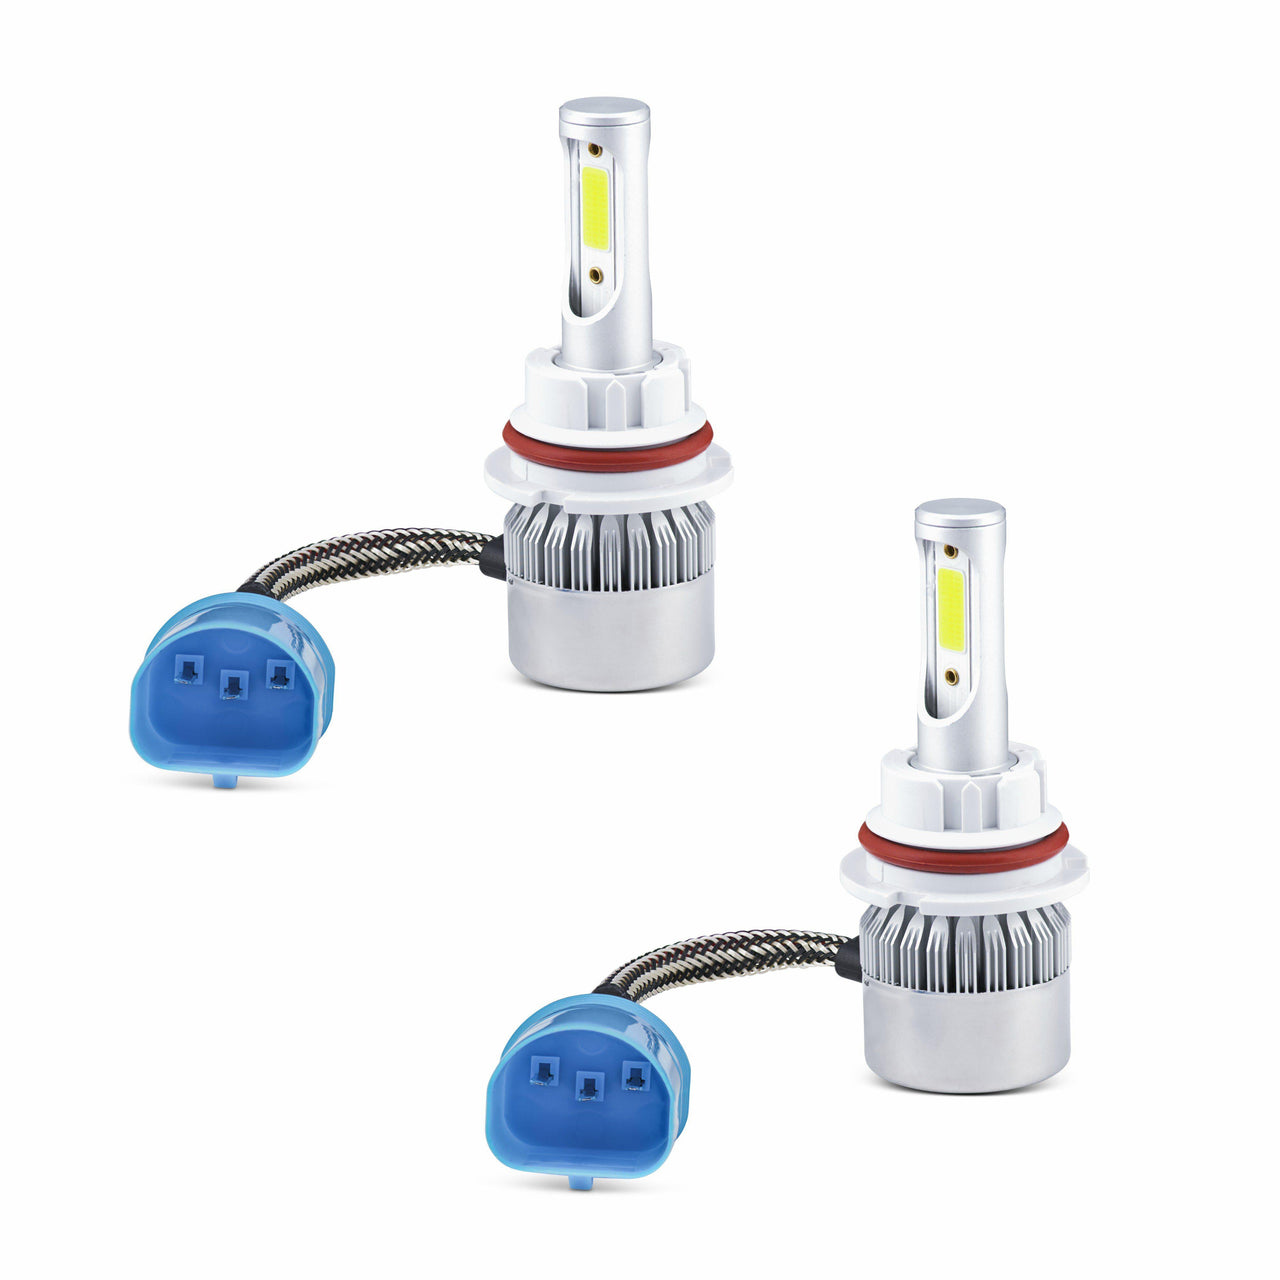 9007 LED Headlight Conversion Kit also known as HB5